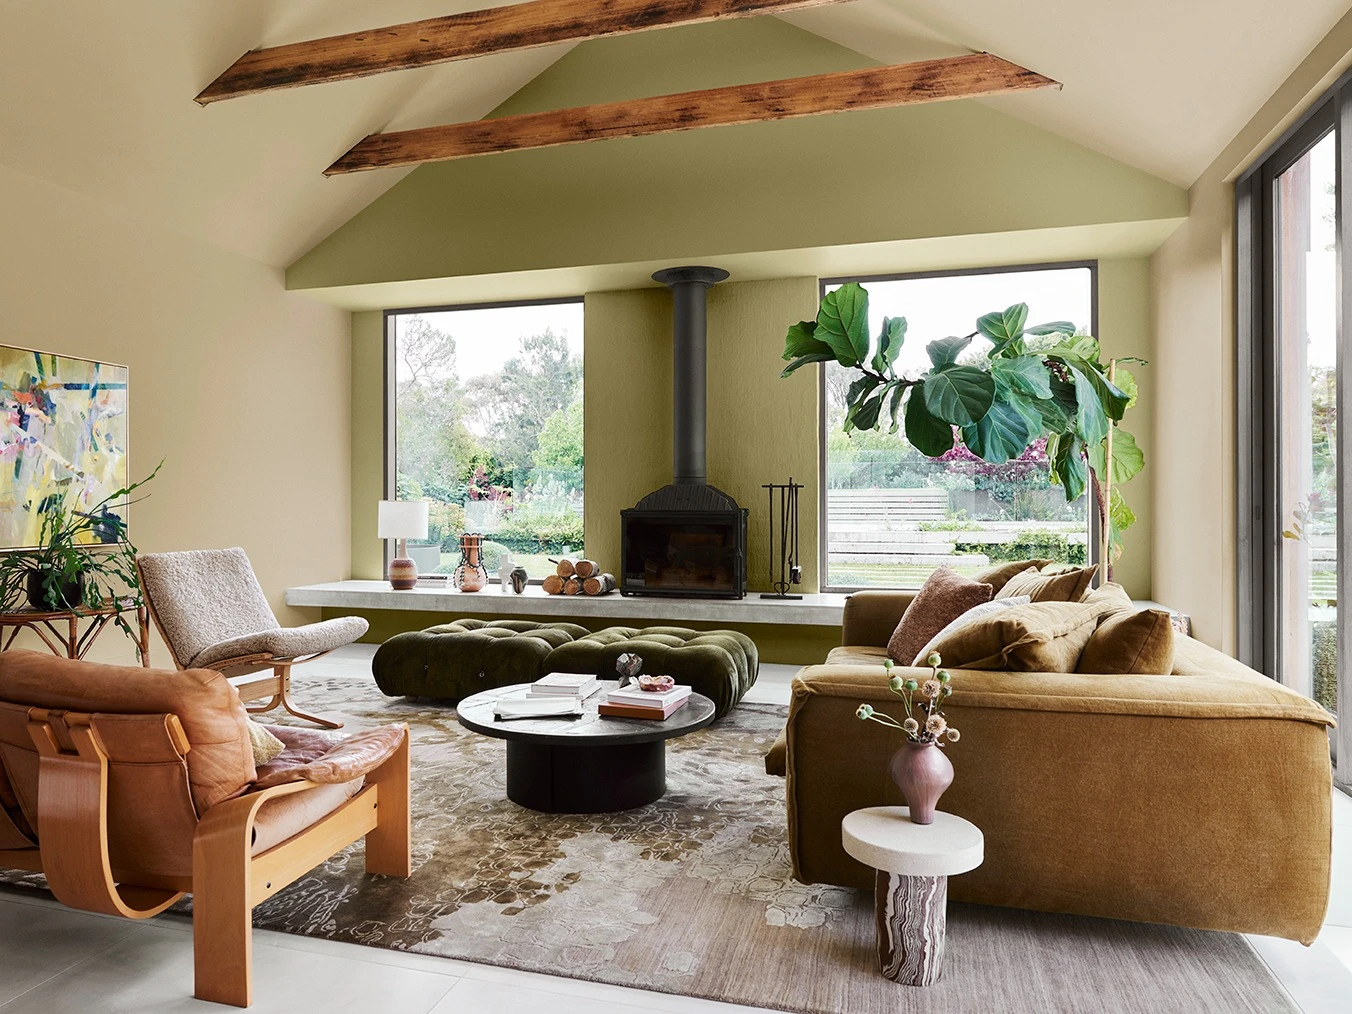 Cosy interior living room with soft green walls, fireplace and timber beams